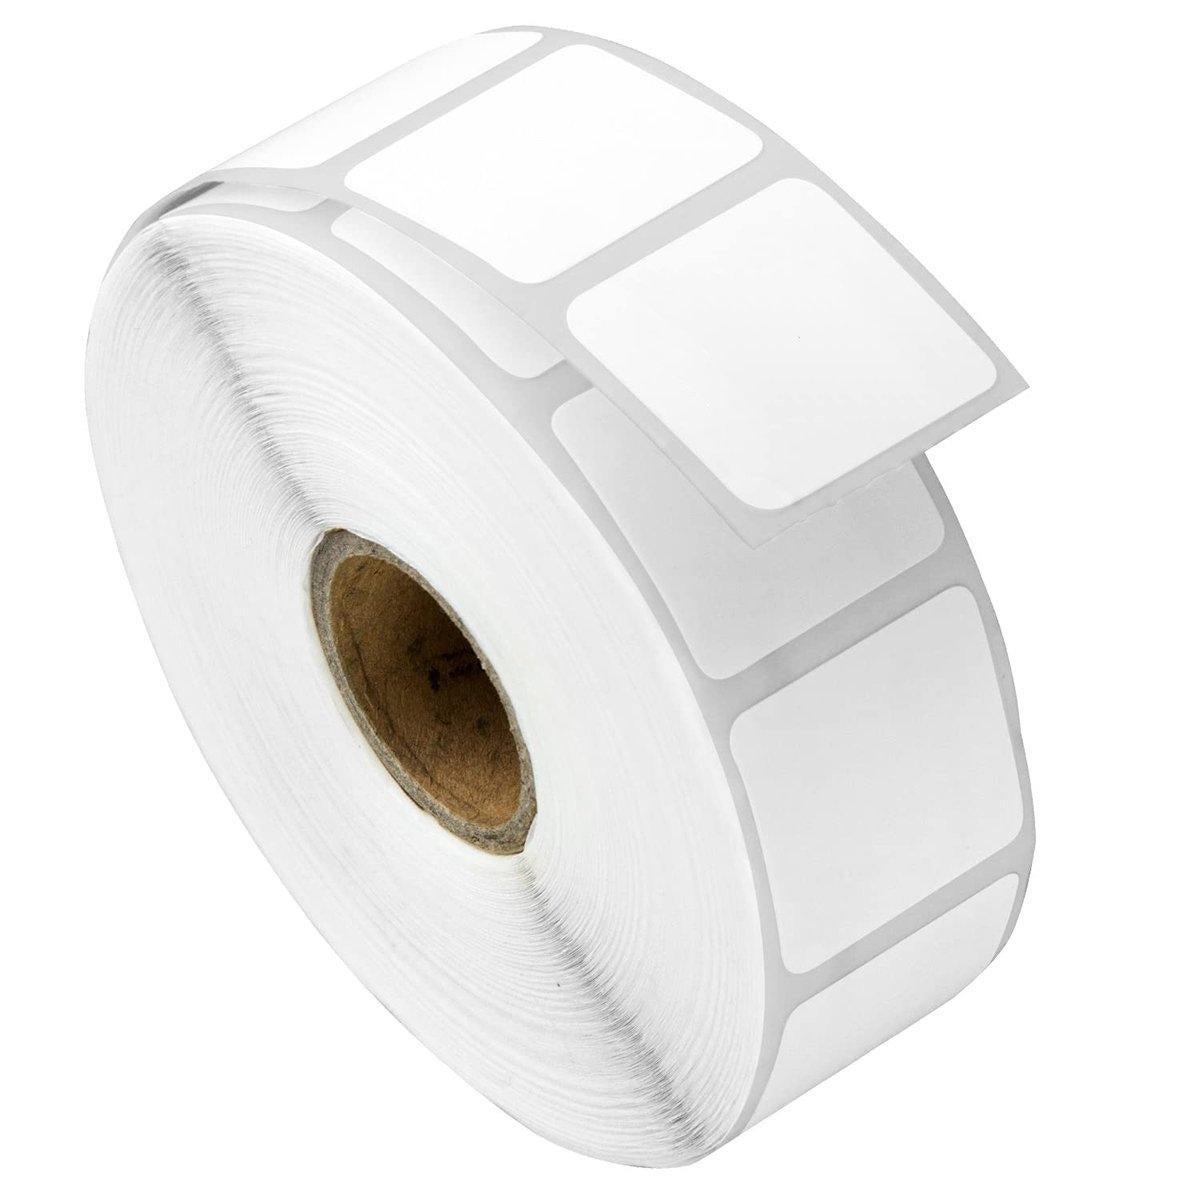 4 Rolls 25.4mm x 25.4mm Square Perforated Direct Thermal Labels White - 2000 Labels per Roll